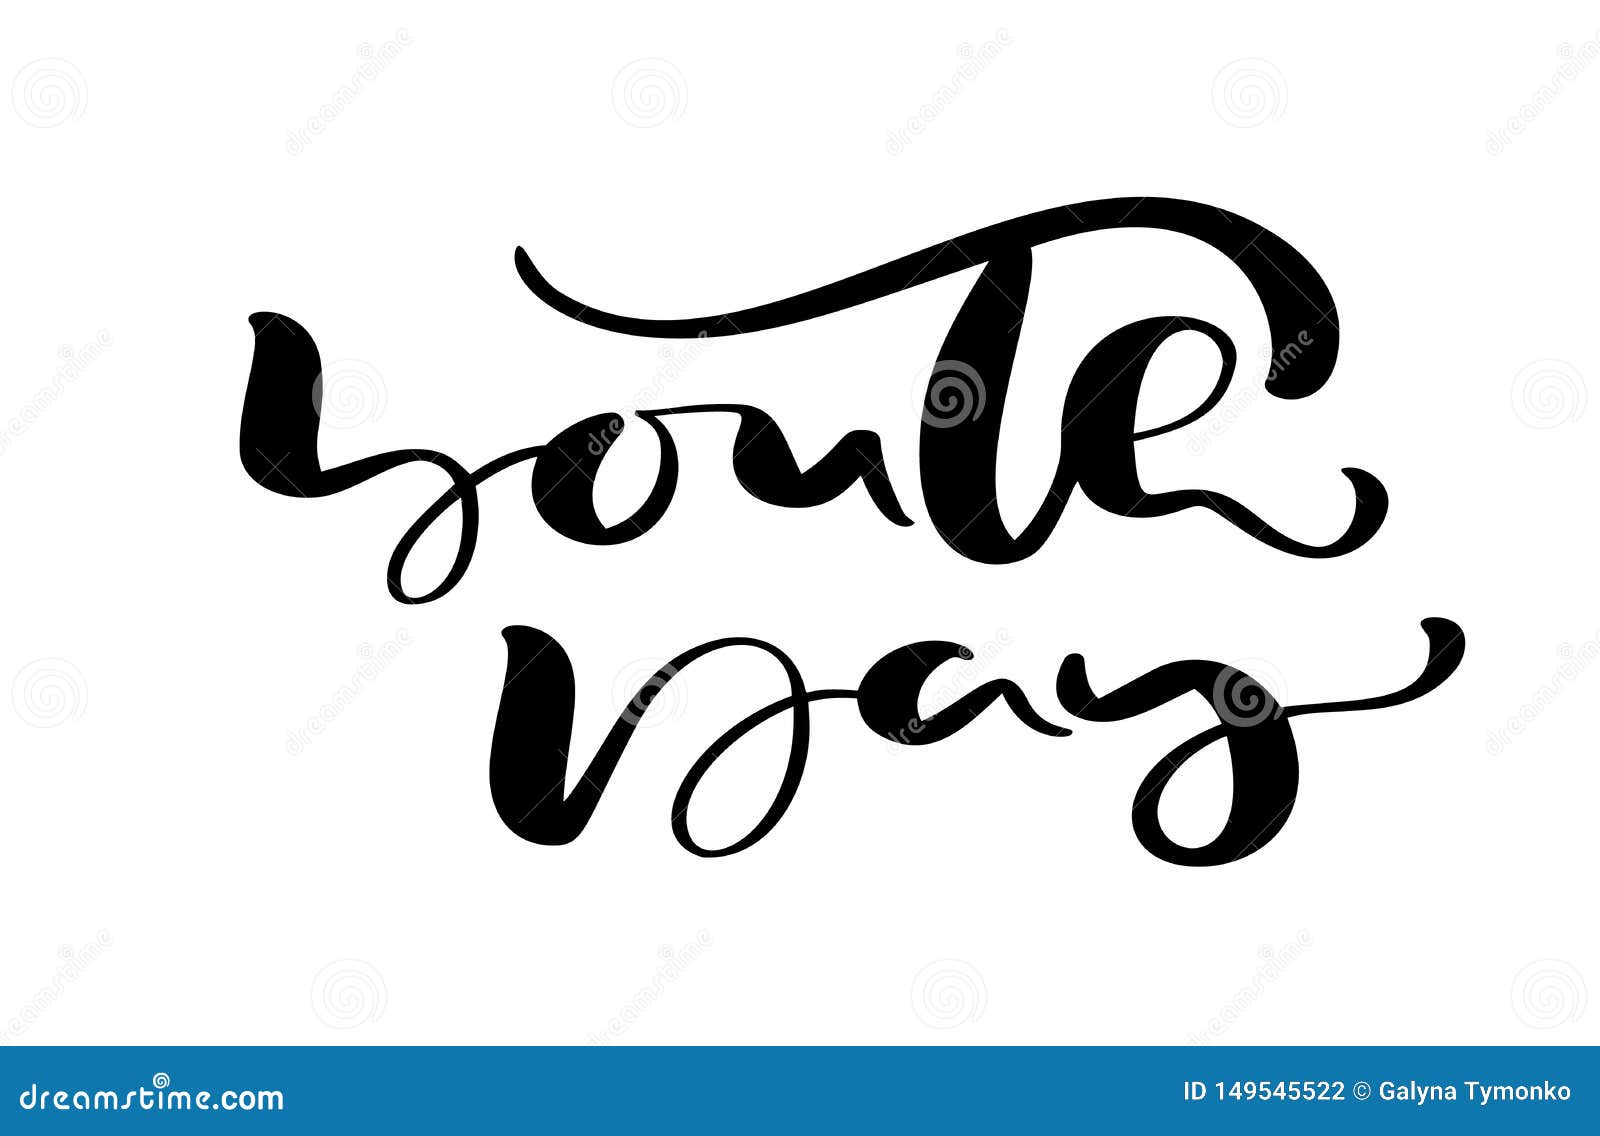 Youth Day Vector Calligraphy Lettering Phrase For ...